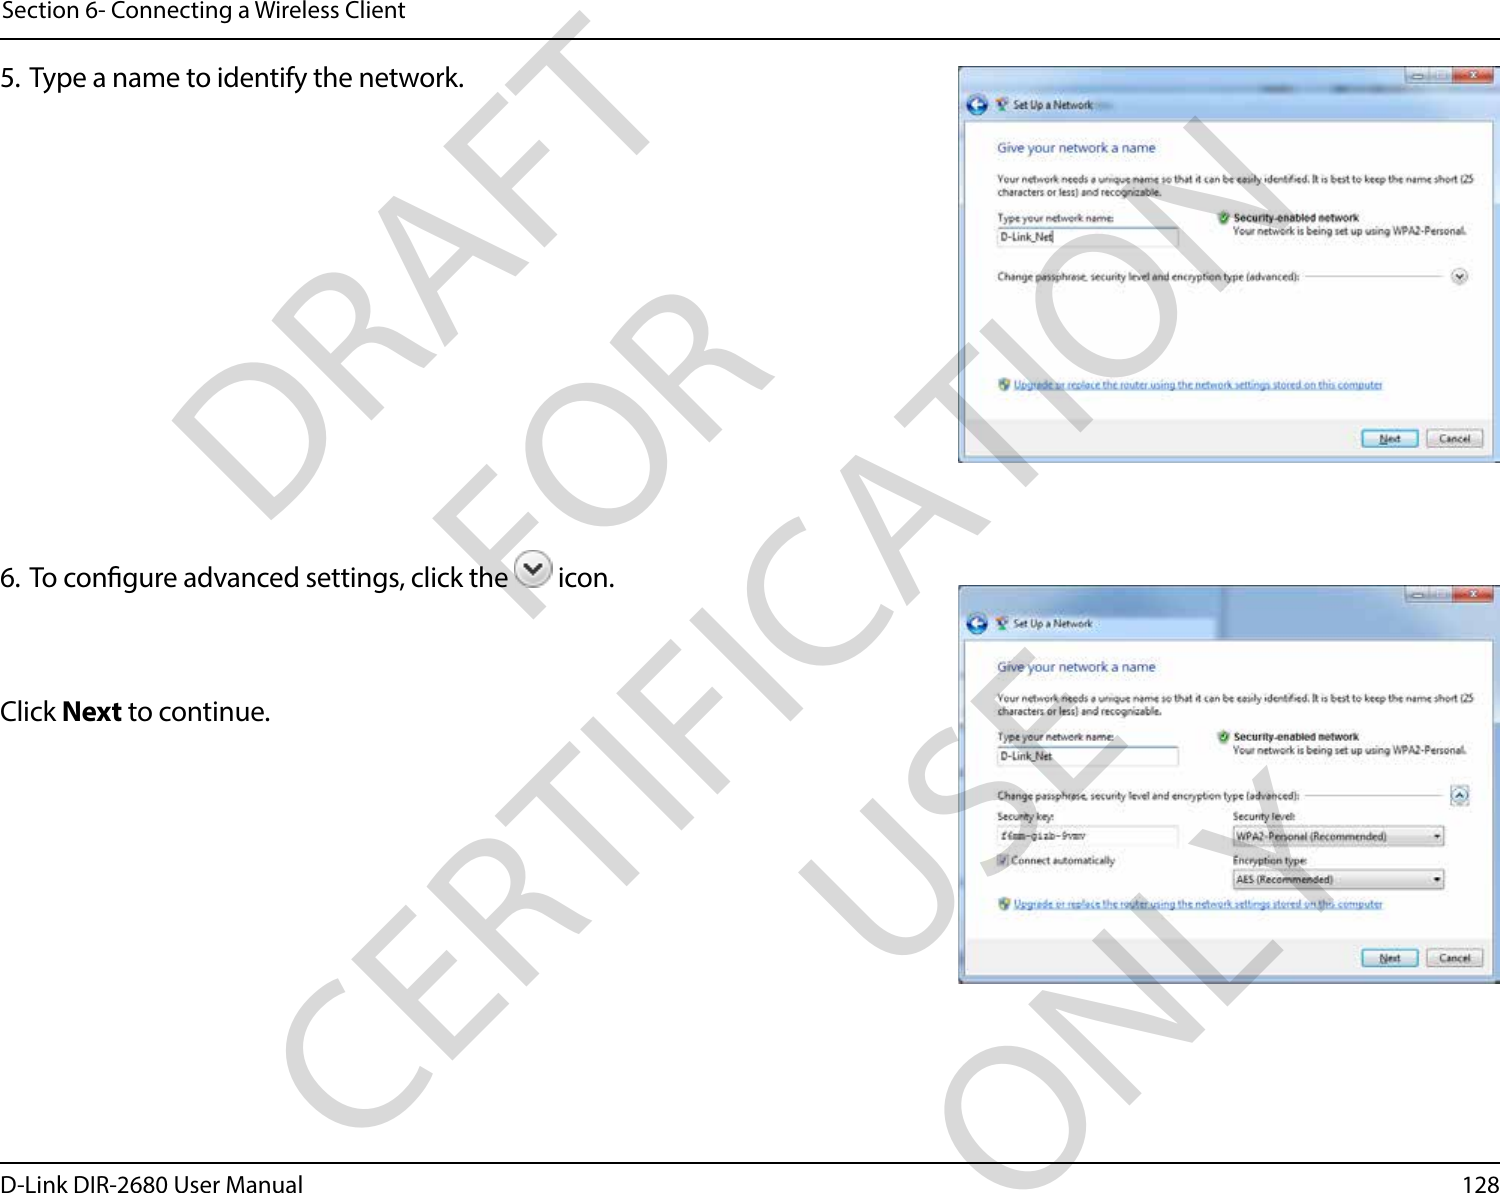 128D-Link DIR-2680 User ManualSection 6- Connecting a Wireless Client5. Type a name to identify the network.6. To congure advanced settings, click the   icon.Click Next to continue.DRAFT FOR CERTIFICATION USE ONLY